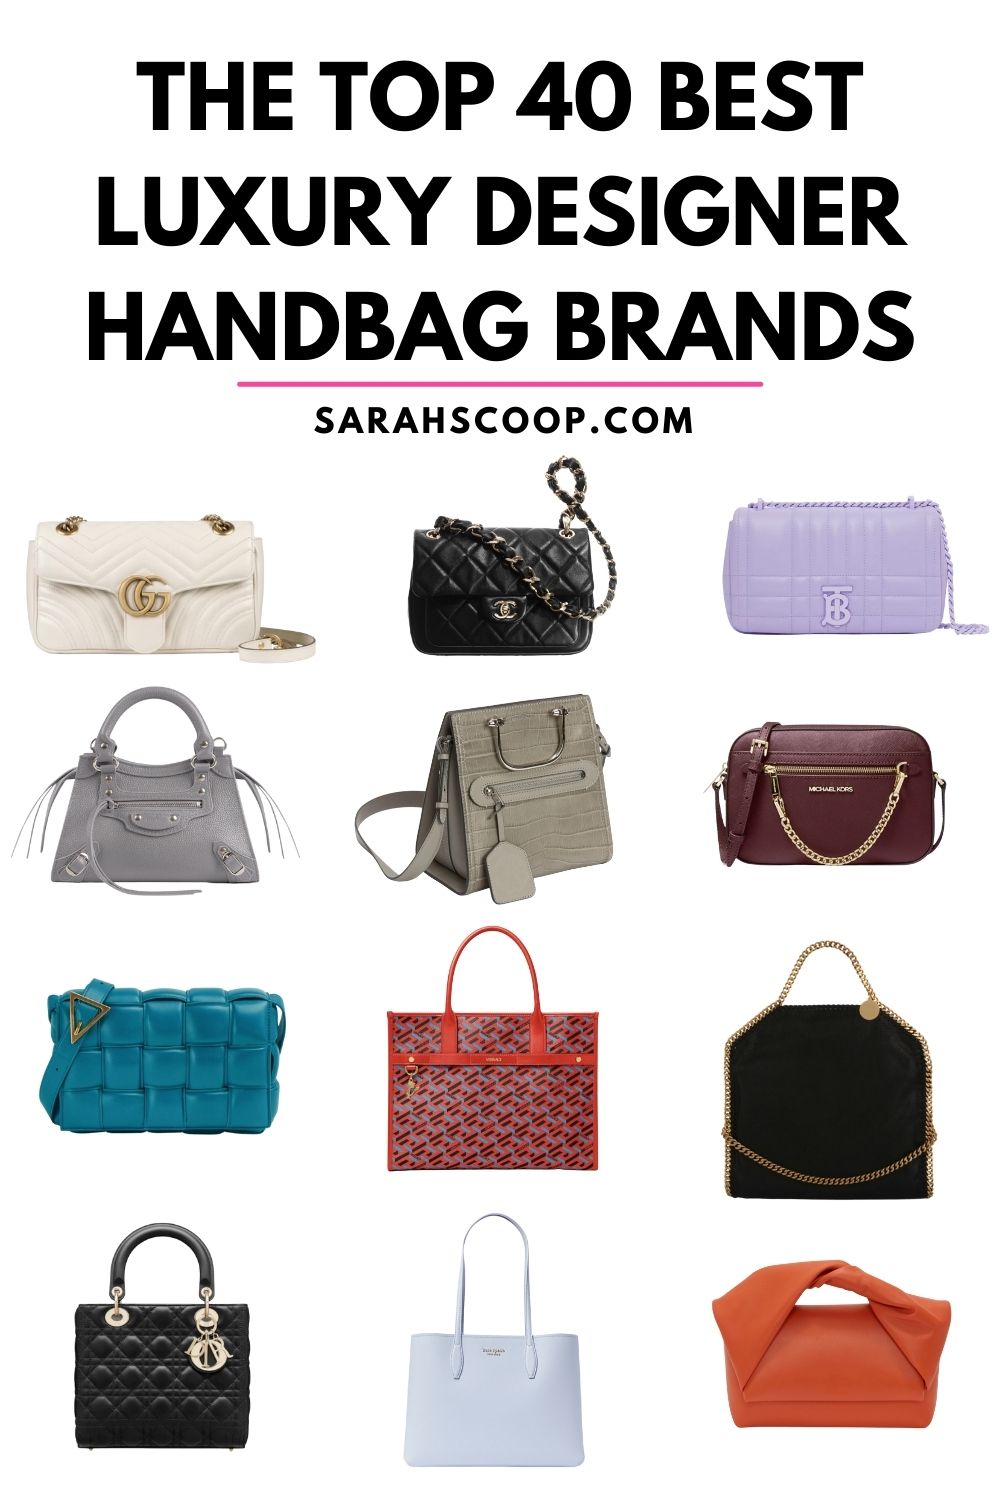 The Most Expensive Handbag Brands | Clever Girl Finance